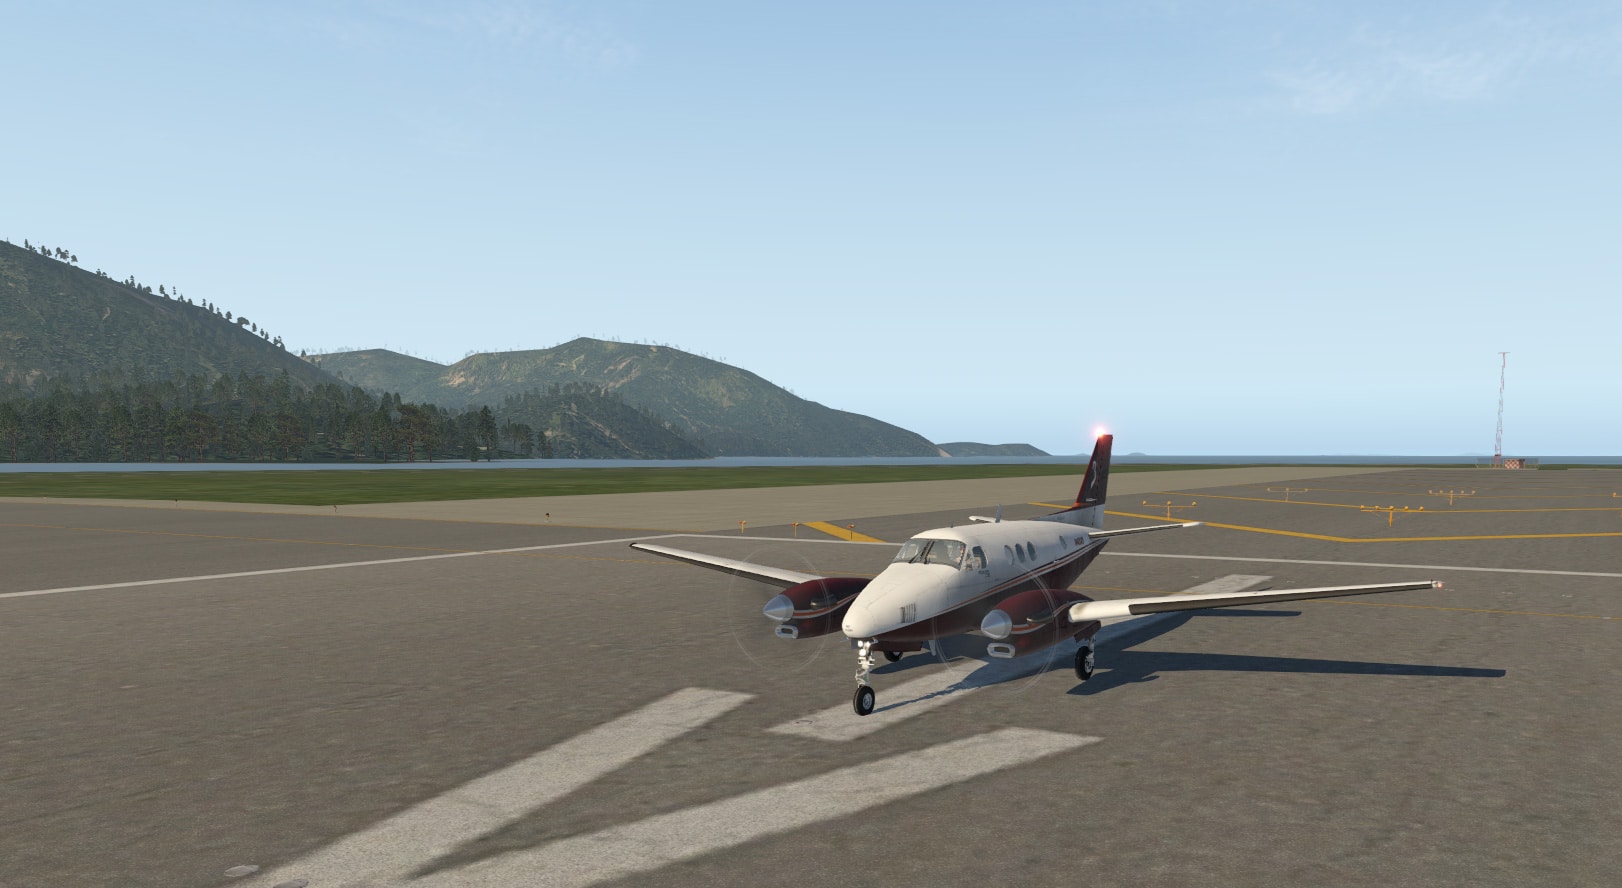 In this image you see a photo of the Beechcraft King Air Airplane from X-Plane 11 sitting on the tarmac with mountains in the background.